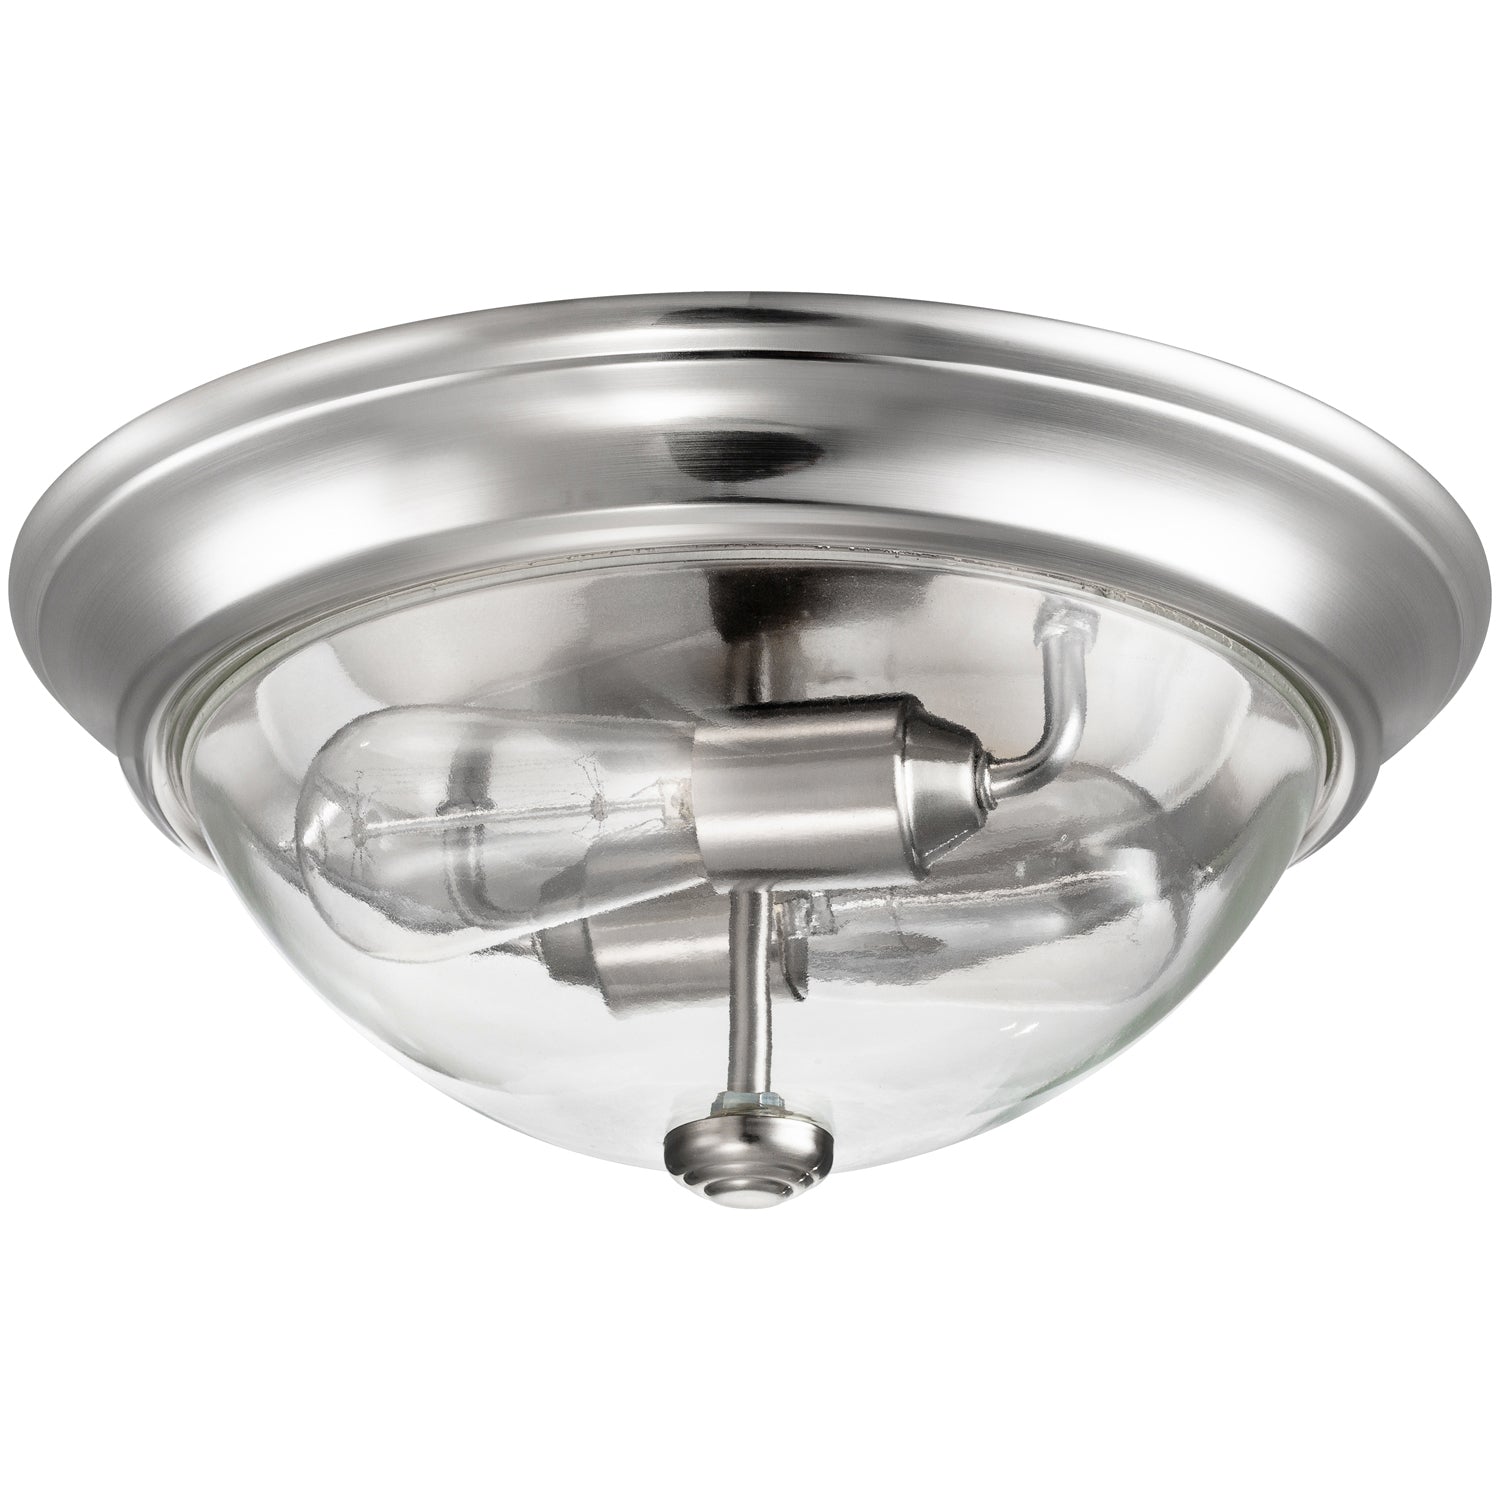 13 Inch Designer Series Flush Mount, Bowl Light, Clear Glass, Brushed Nickel by Prominence Home